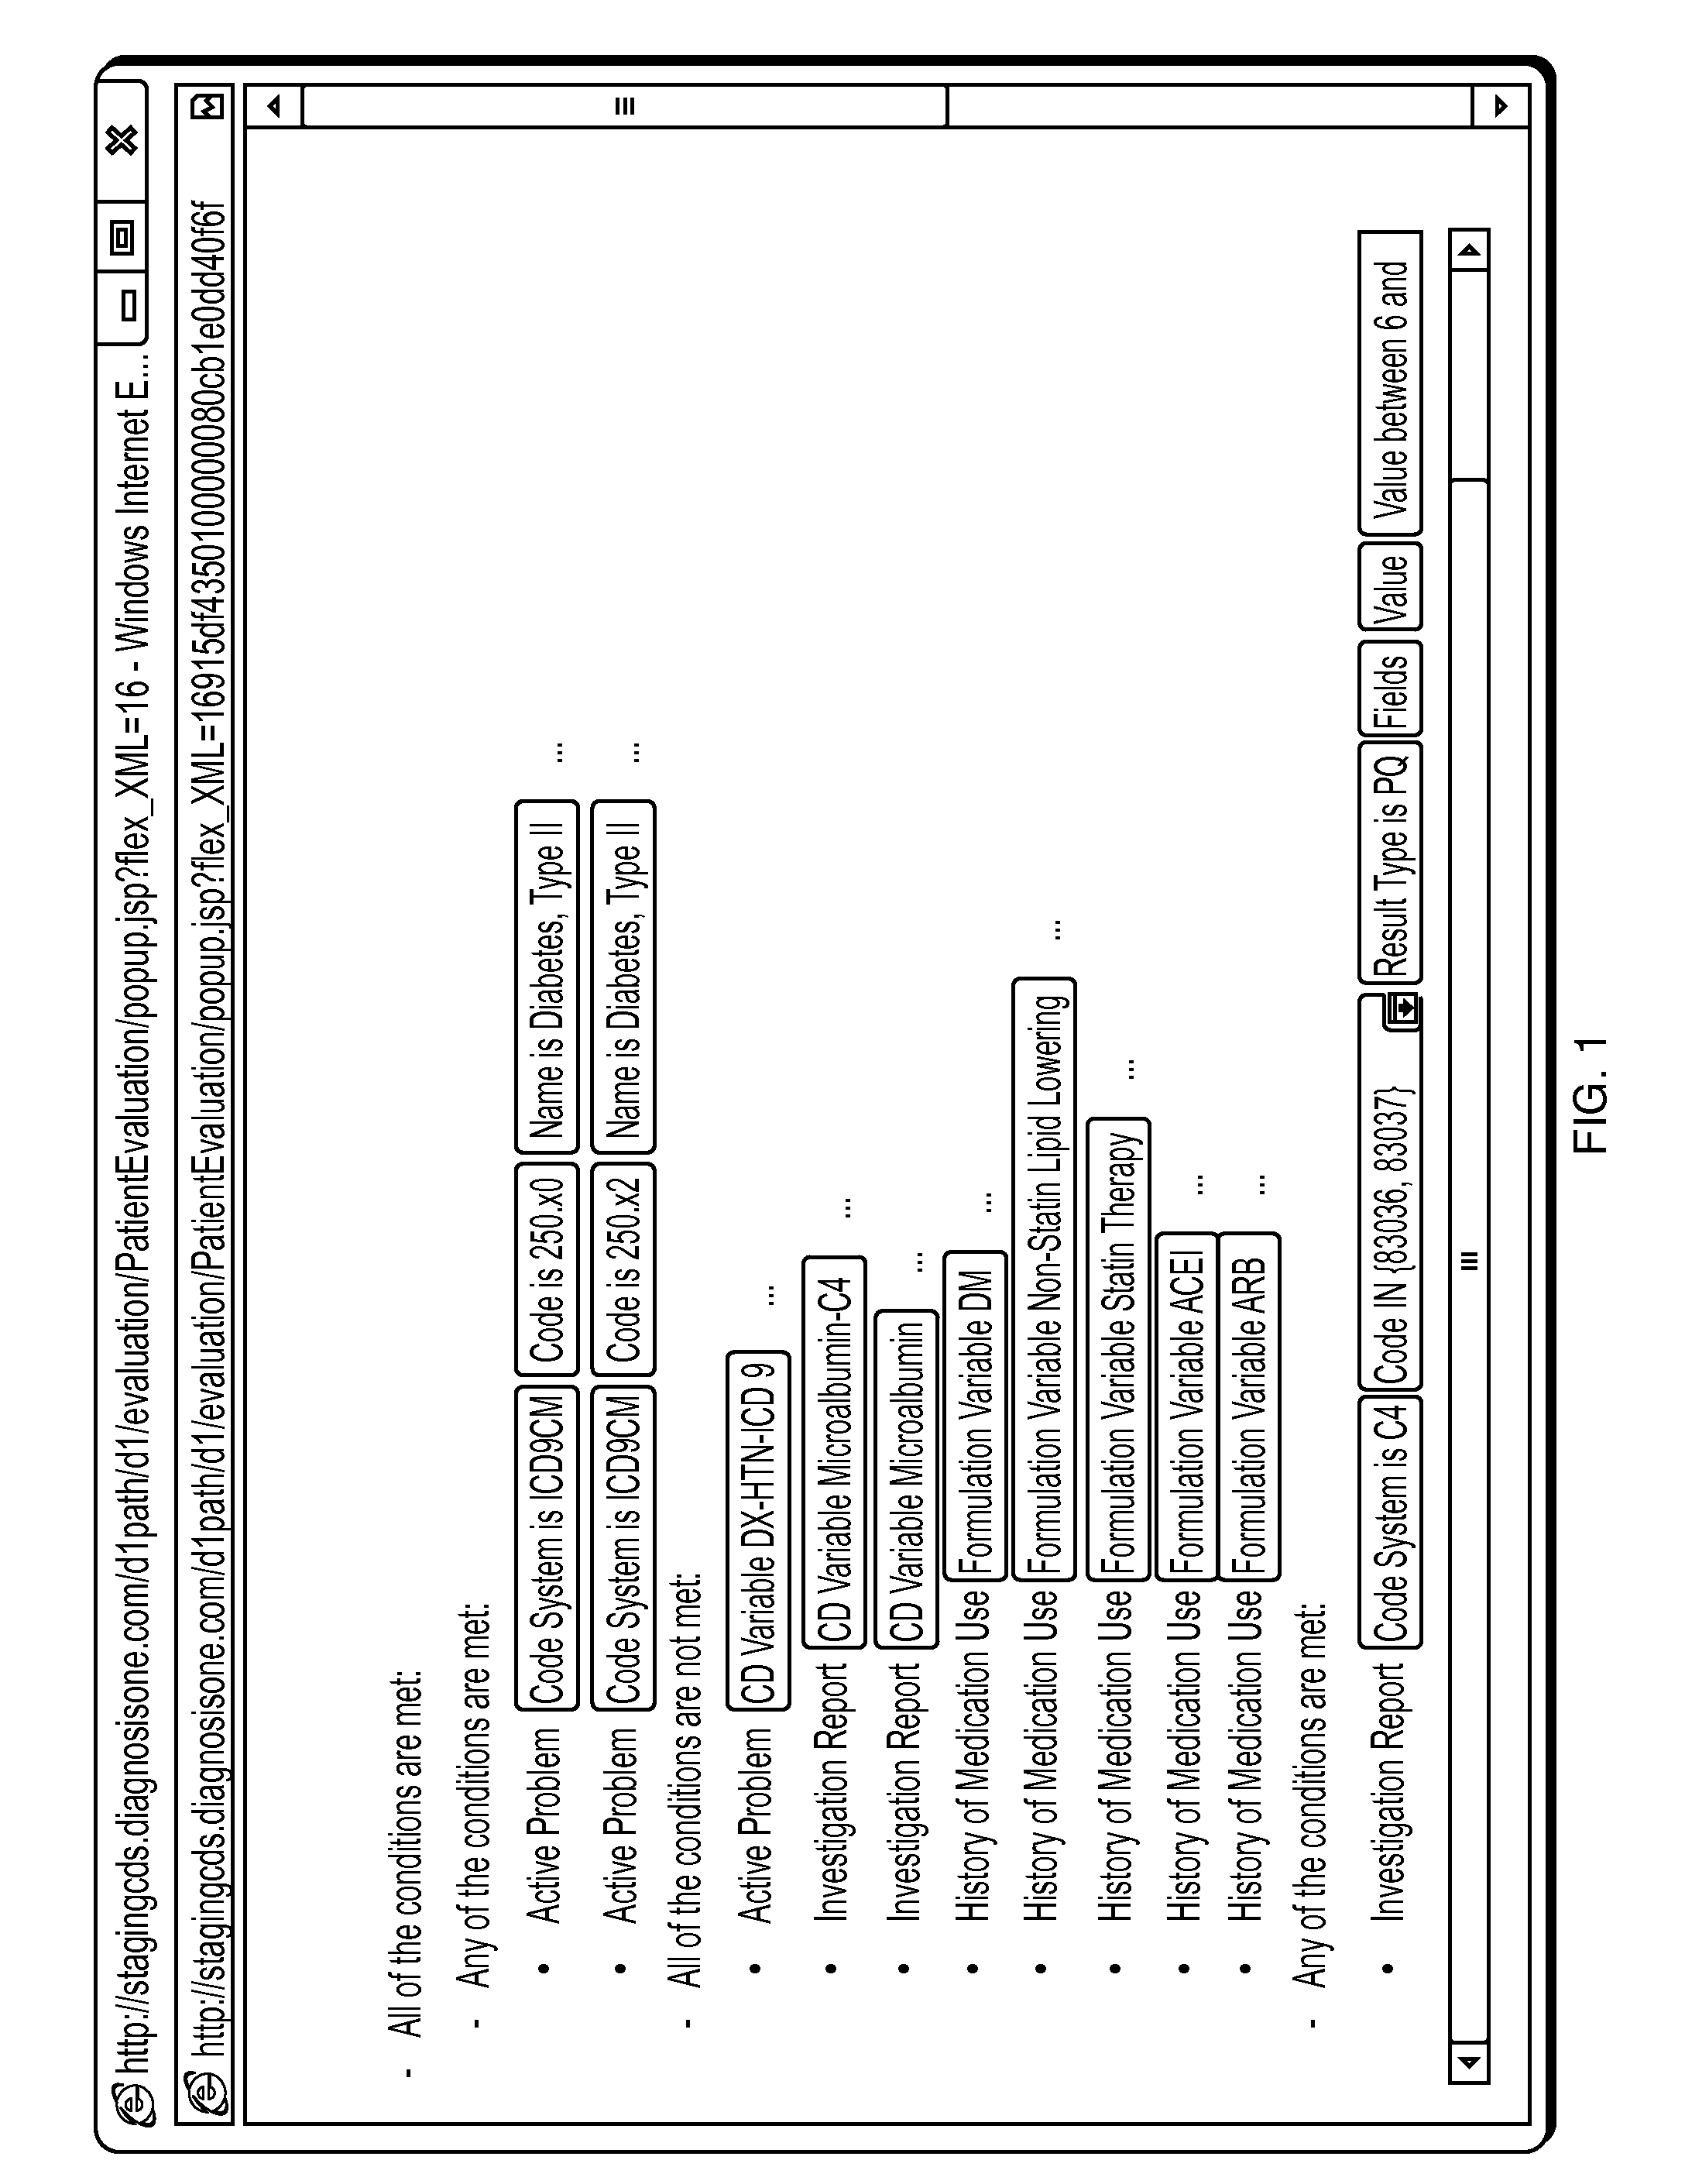 Method And System For Improving Quality Of Care And Safety And Continuous Physician And Patient Learning